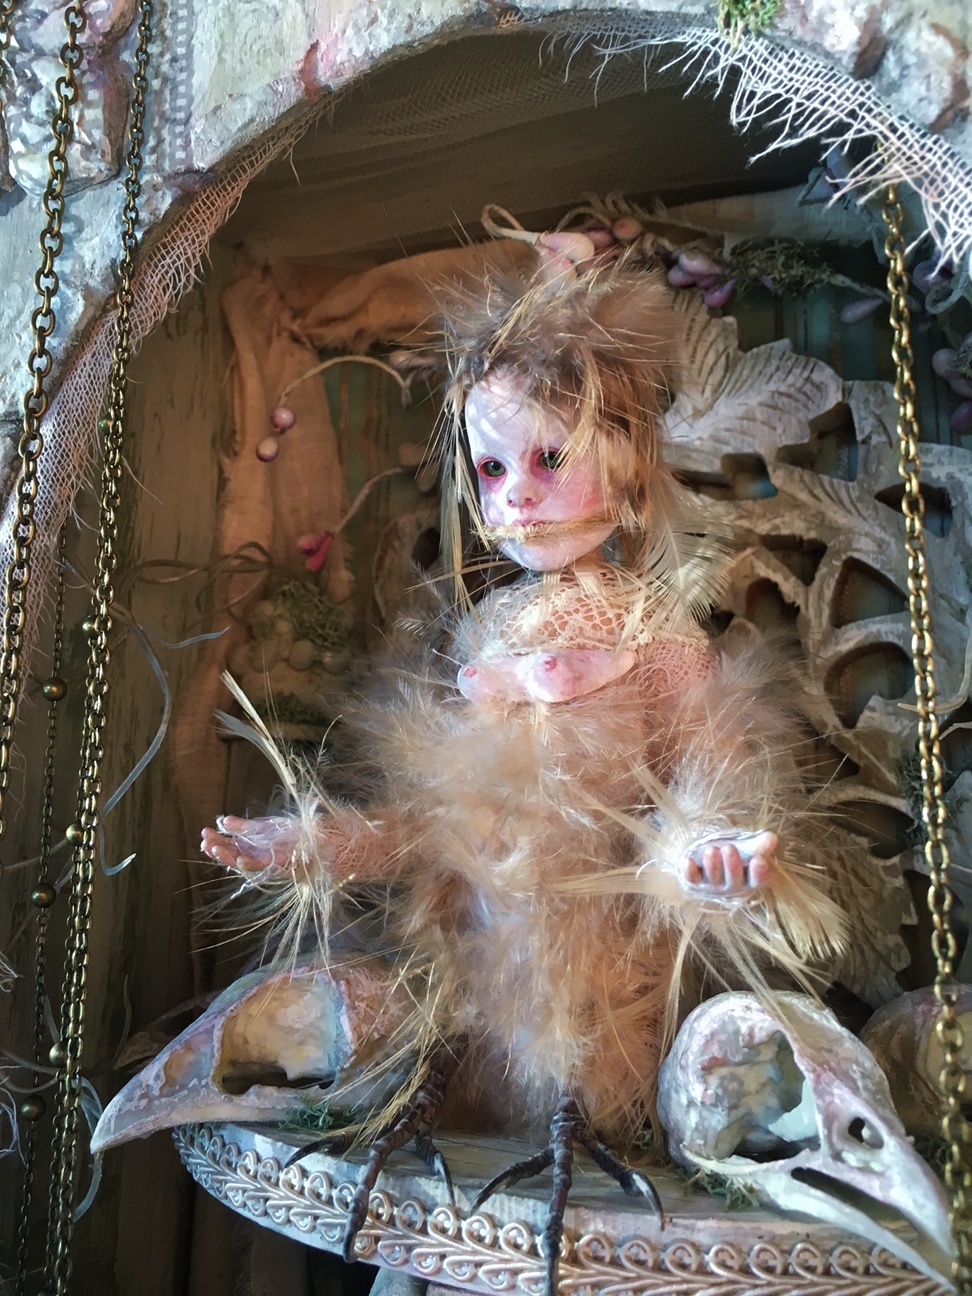 close-up mixed media assemblage artpiece shadowbox gothic feathered songbird artdoll with taxidermied bird feet in a hand-painted shadowbox on a platform with two bird skulls